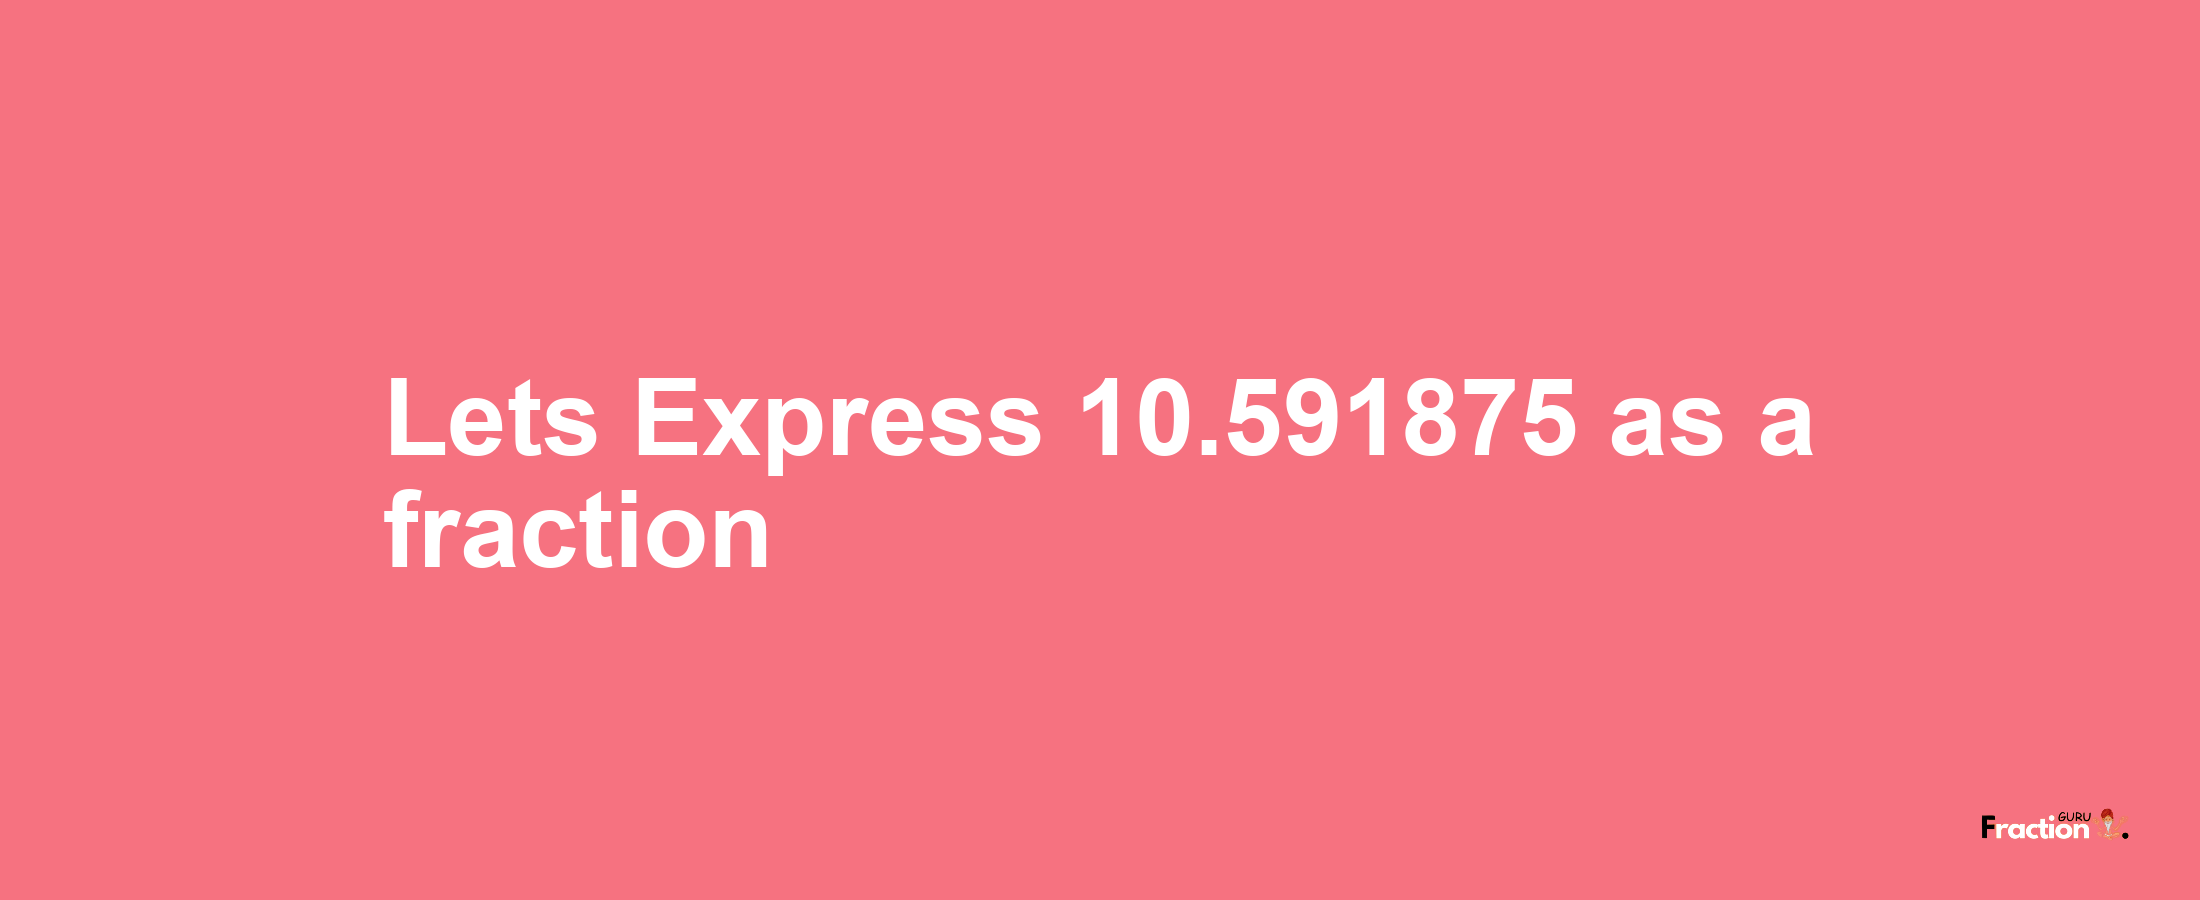 Lets Express 10.591875 as afraction